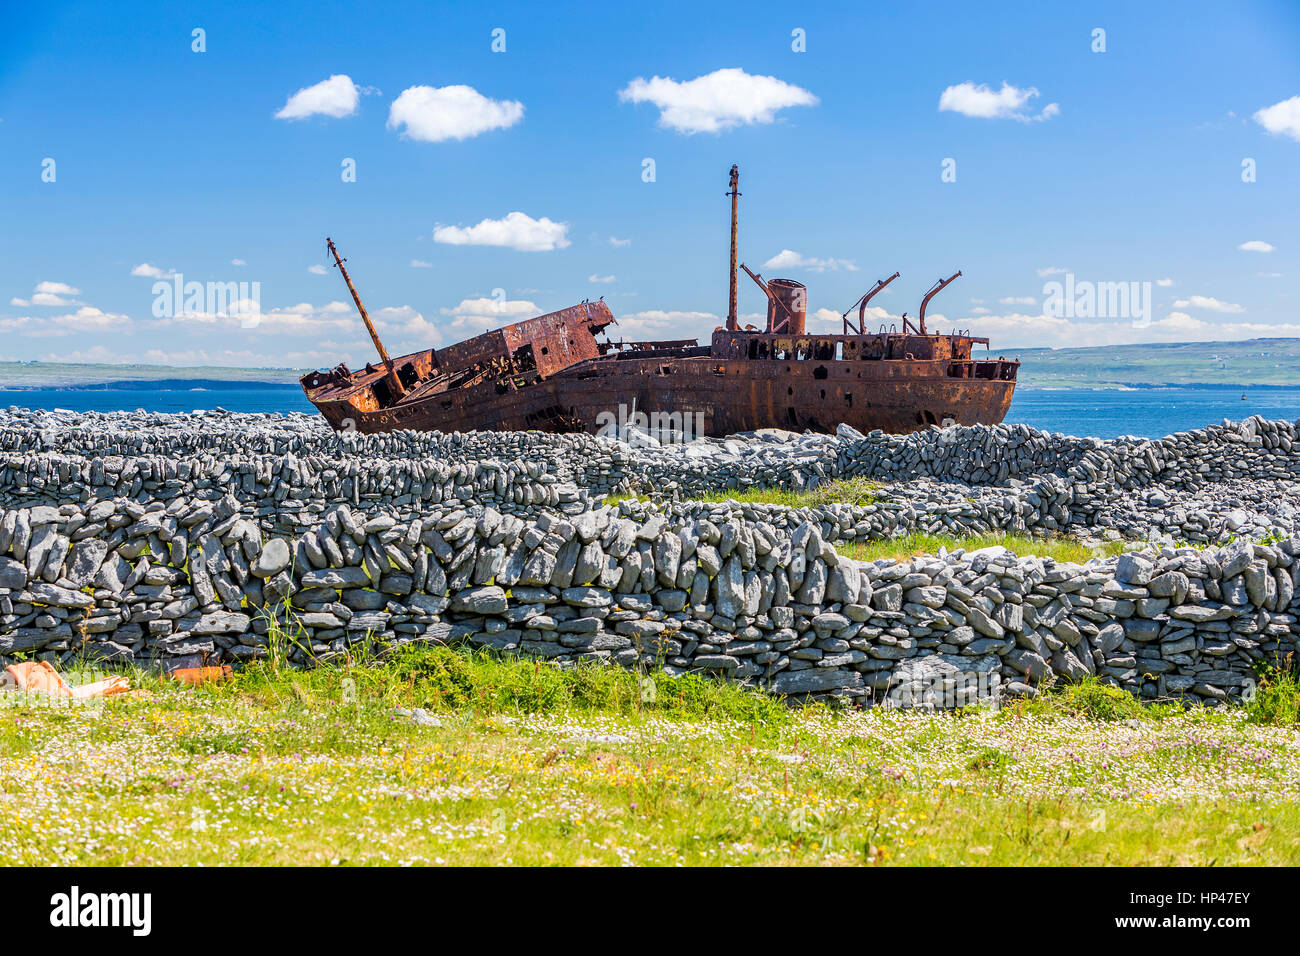 The wreck of the Plassey at Inis Oirr, County Galway, Ireland, Europe. Stock Photo